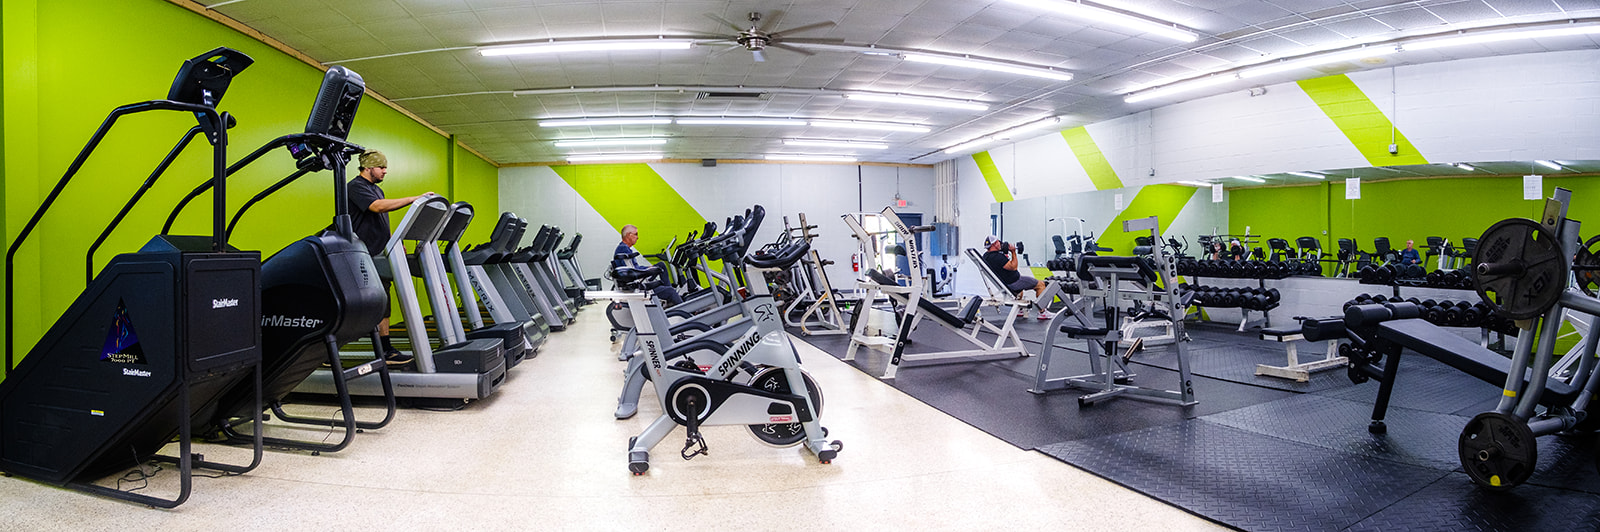 Utopia Fitness Cardio Equipment and weighlifting room